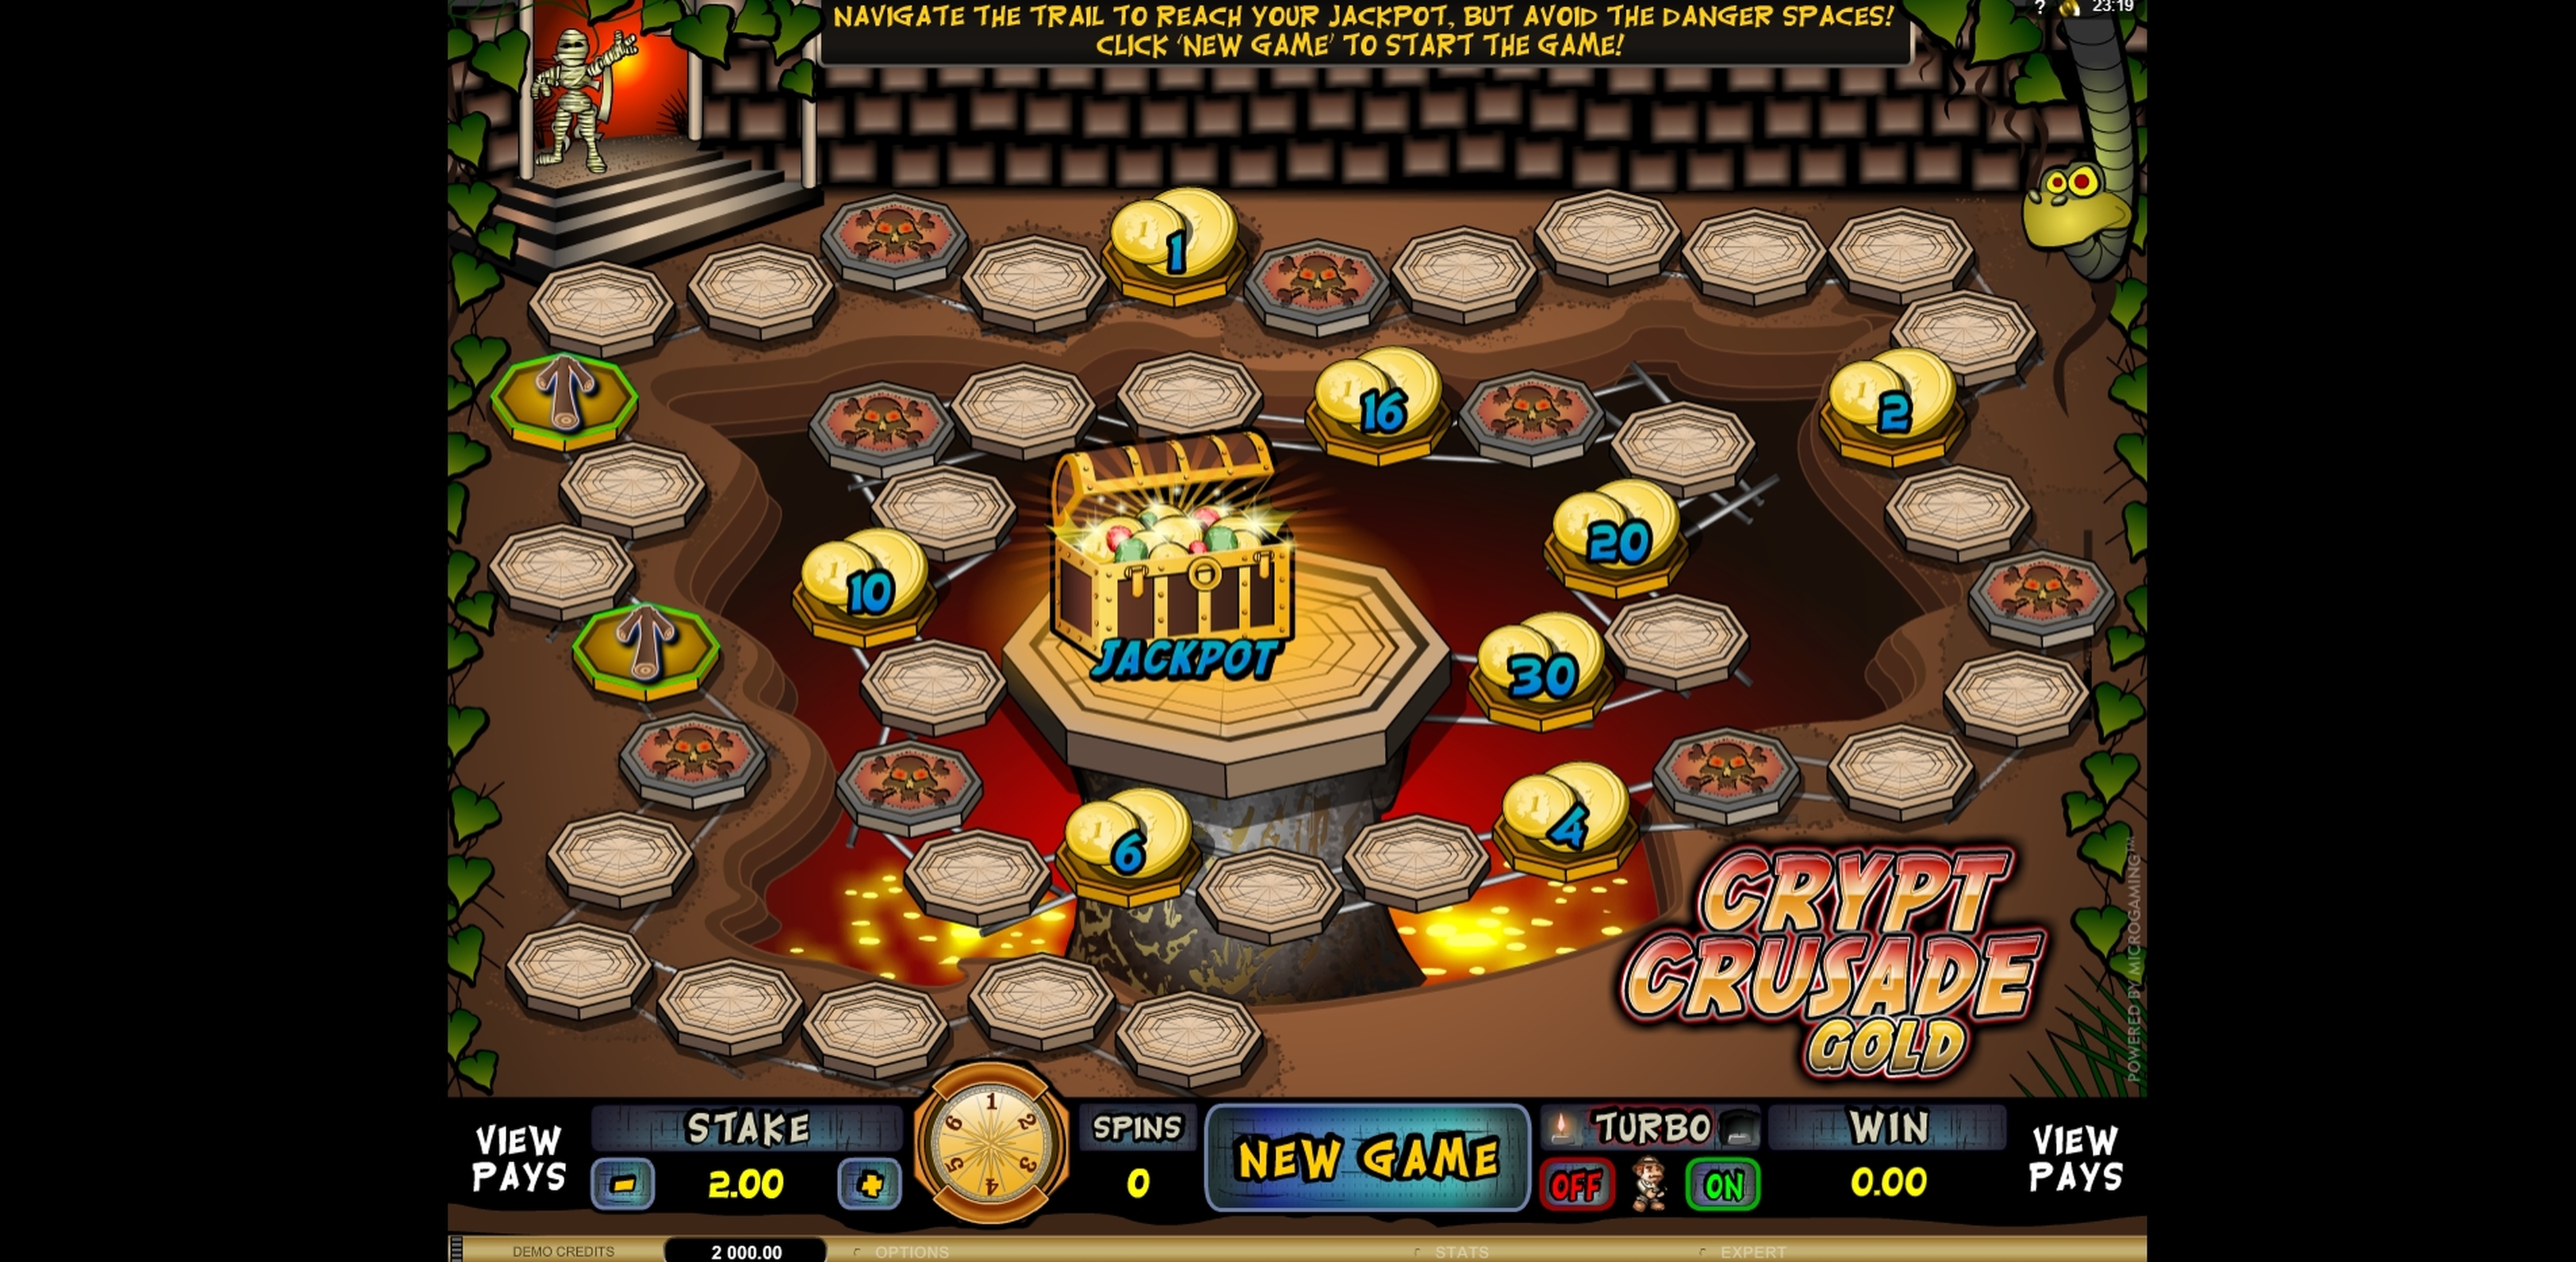 Info of Crypt Crusade Gold Slot Game by Microgaming